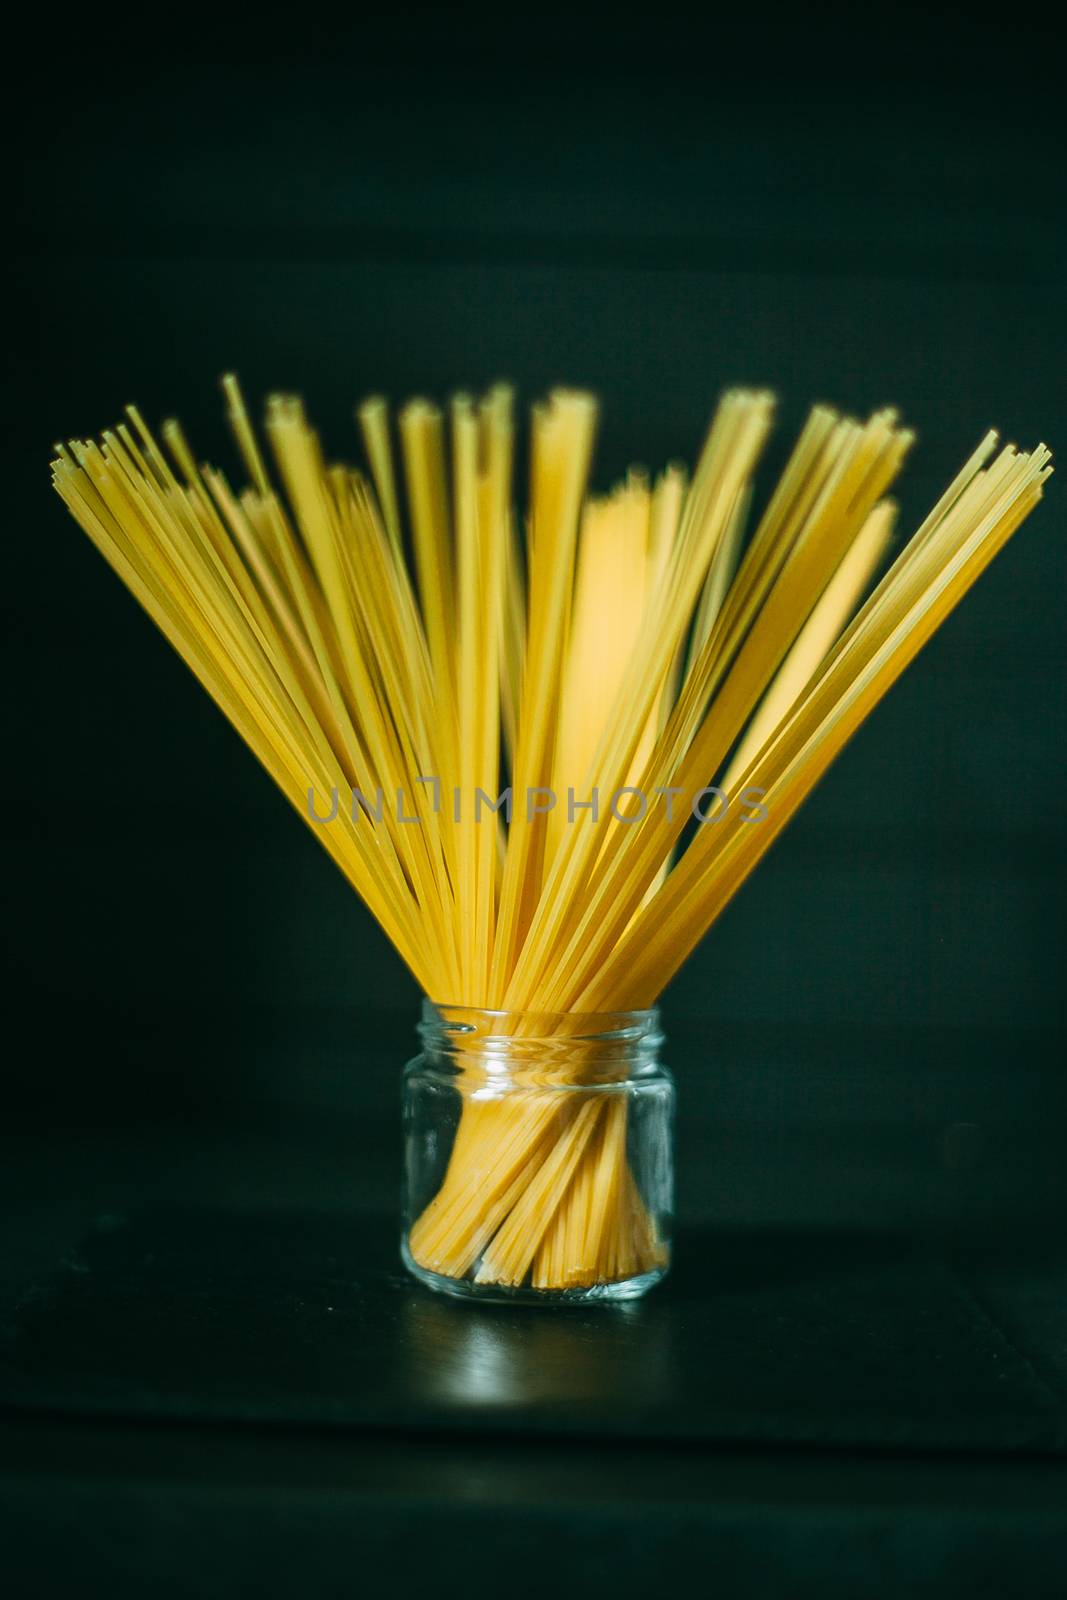 Unfolded spaghetti in a jar on a black wooden background